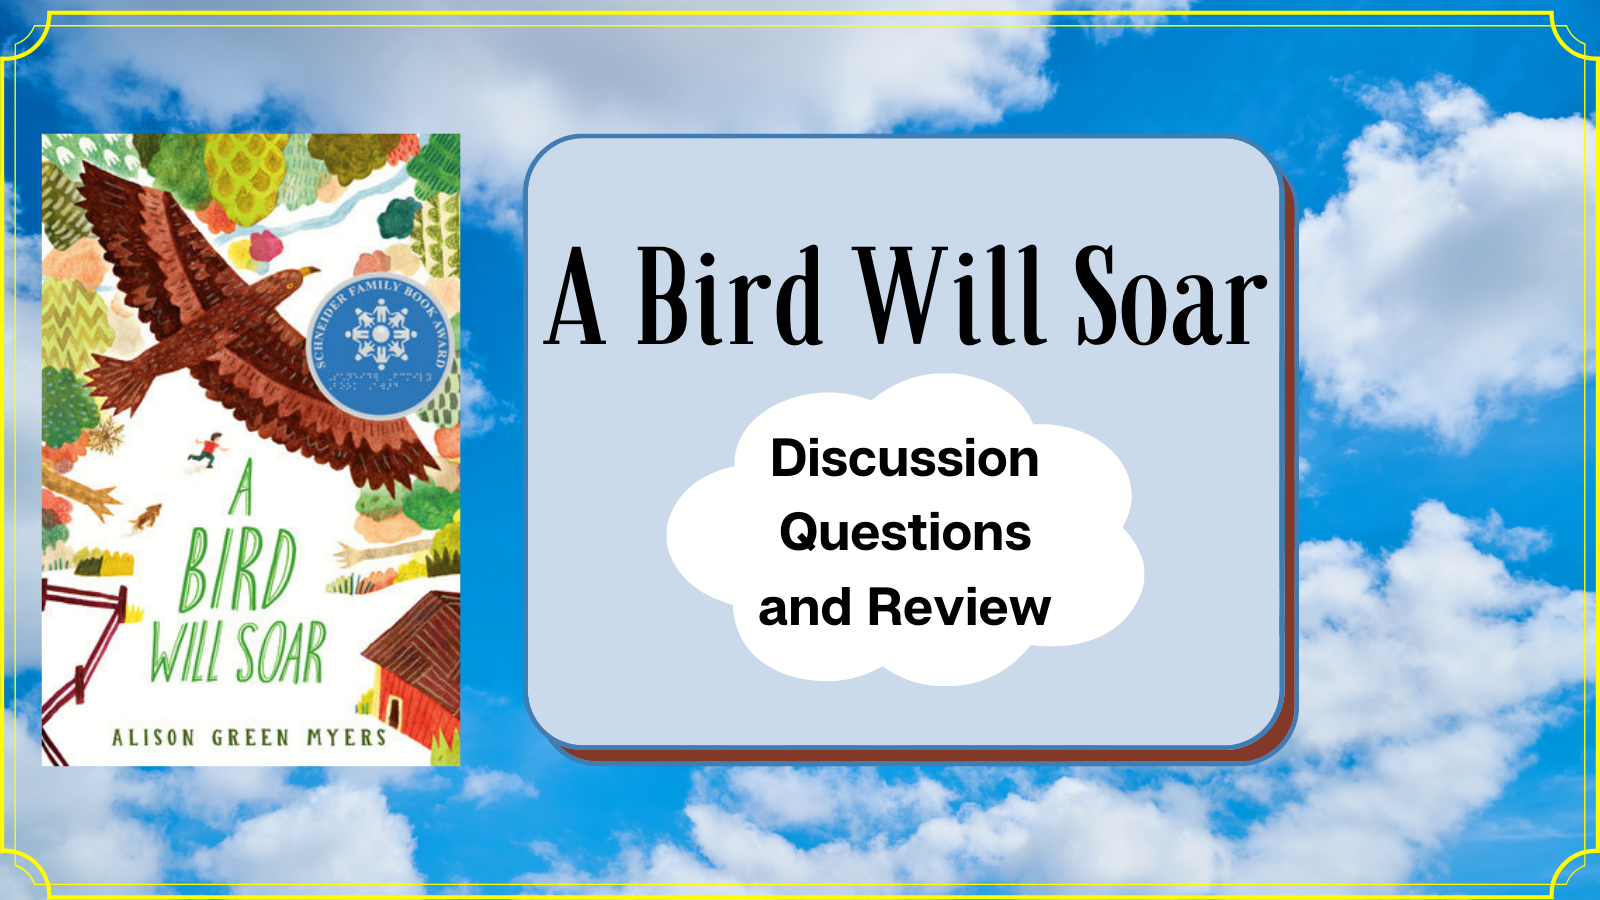 A Bird Will Soar Discussion